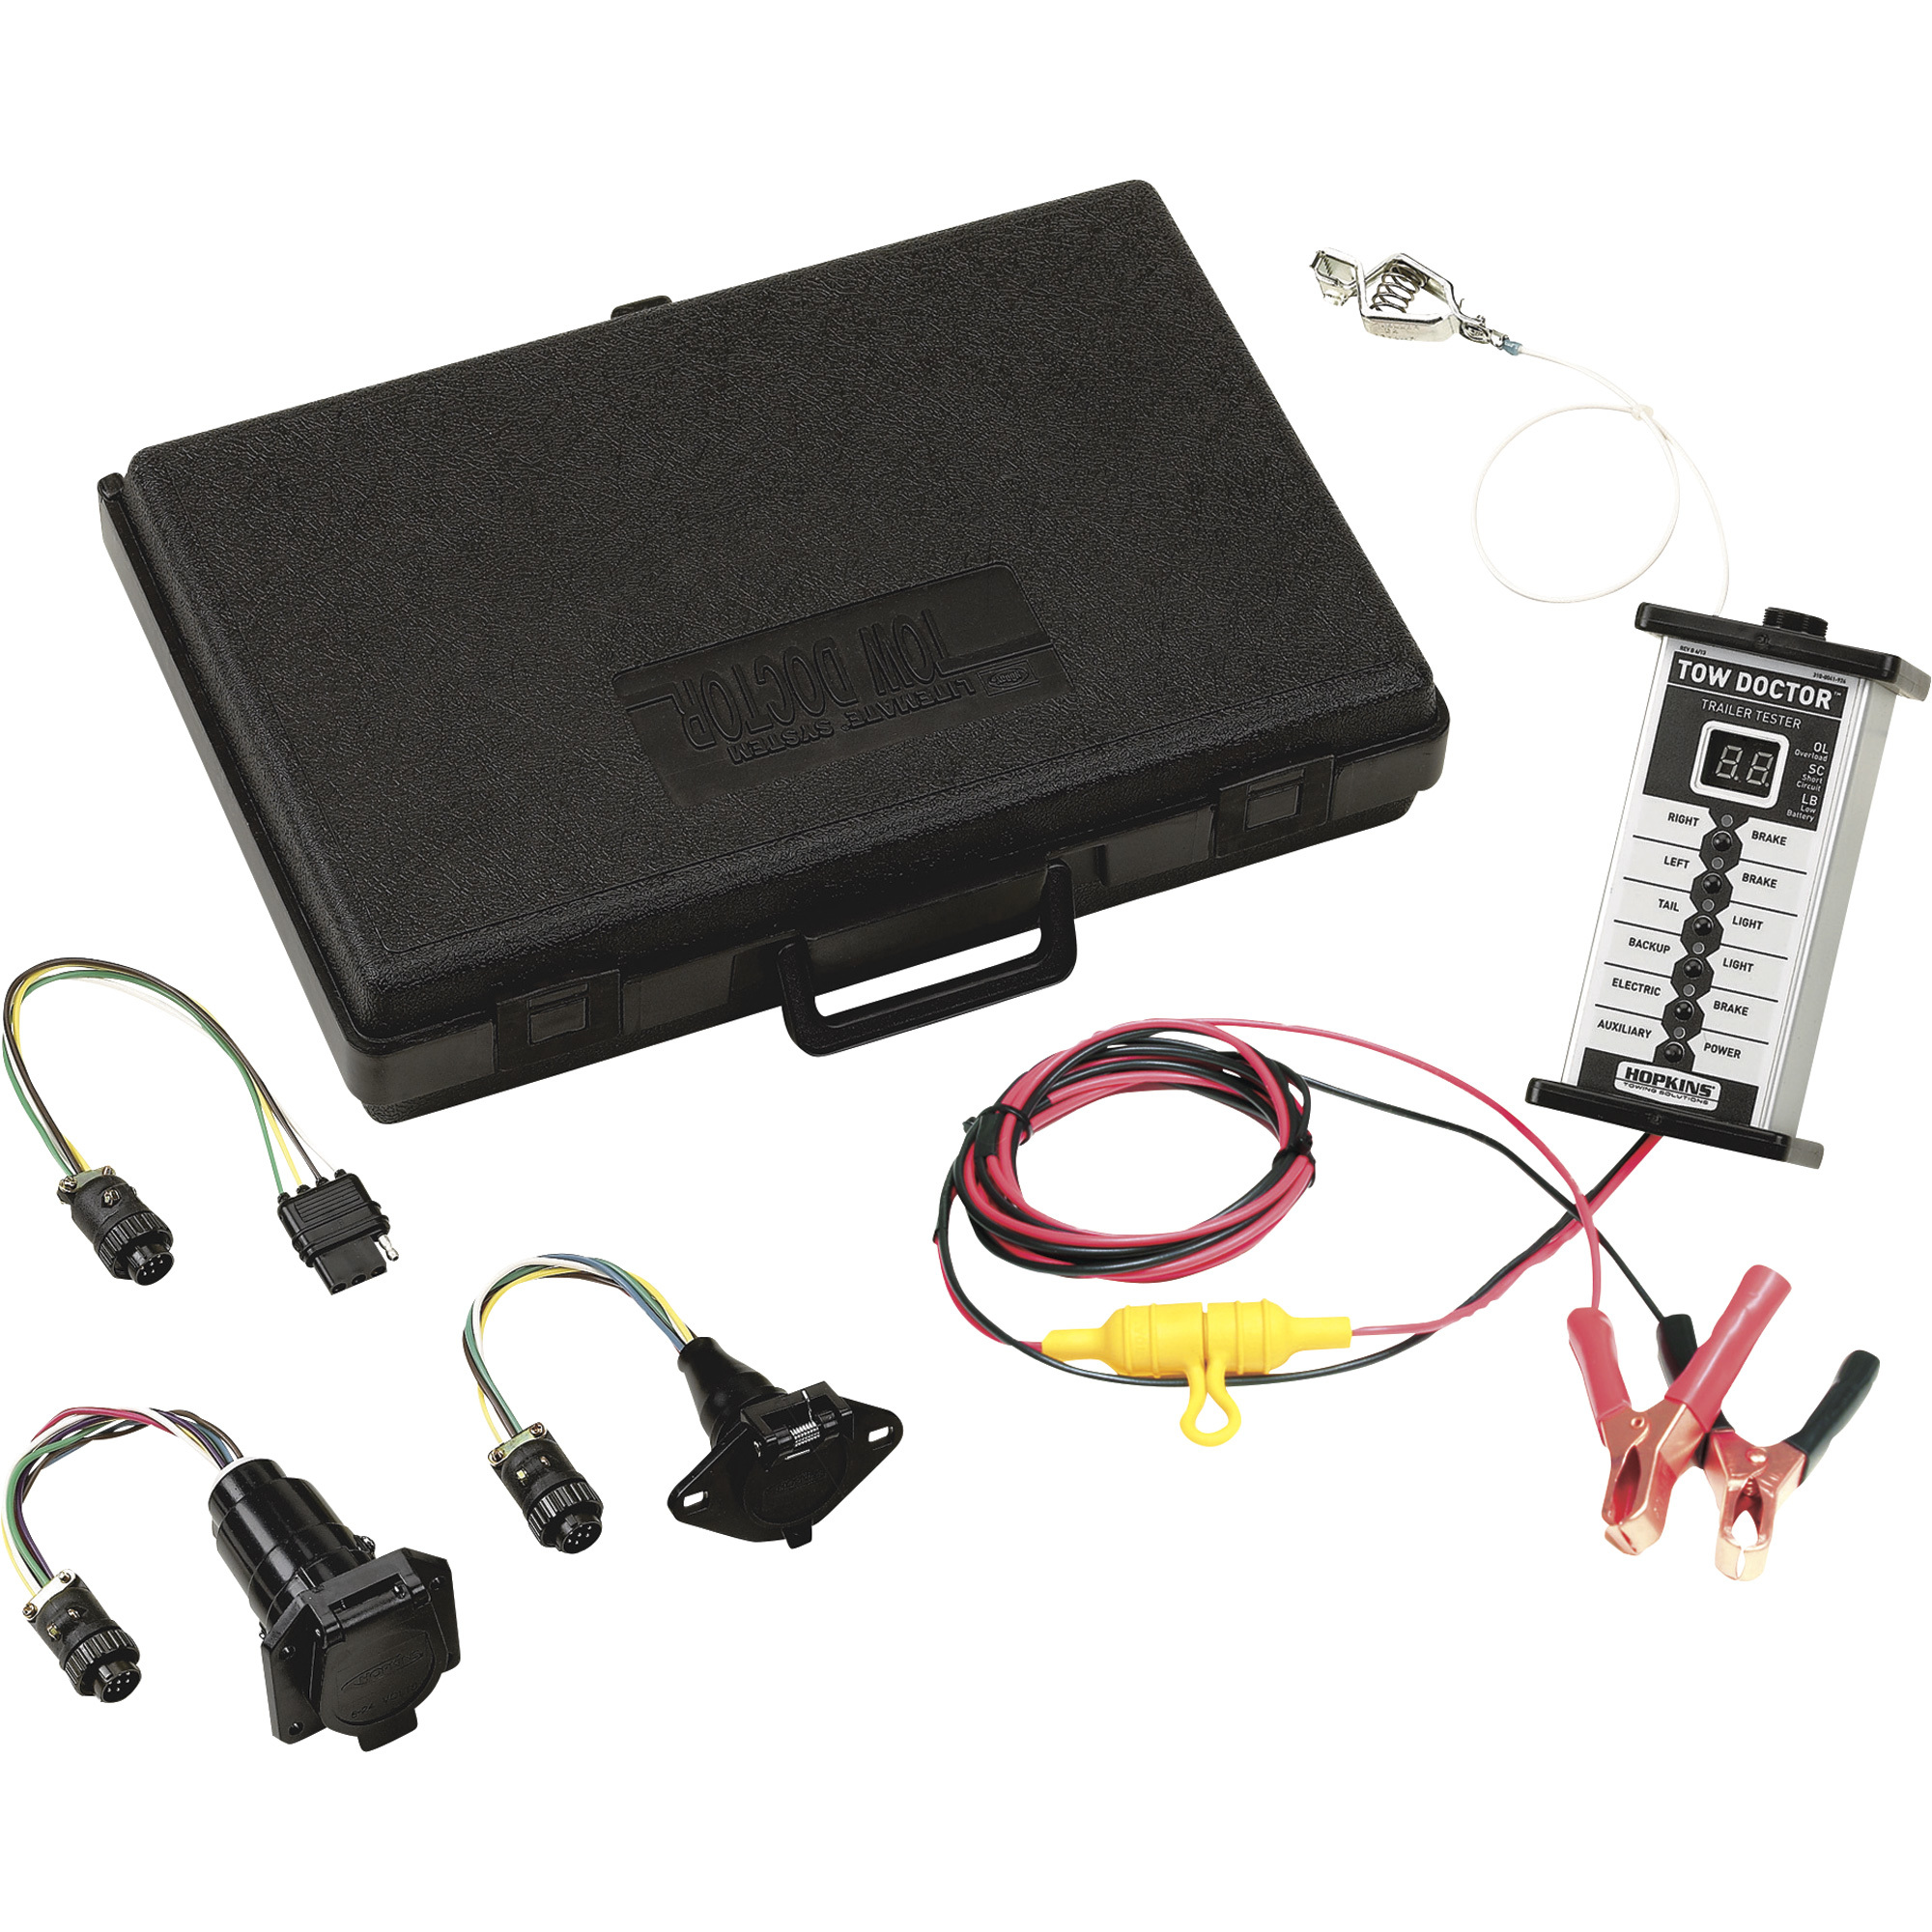 Hopkins Towing Solutions Tow Doctor Trailer Side Test Unit For Trailer Lights